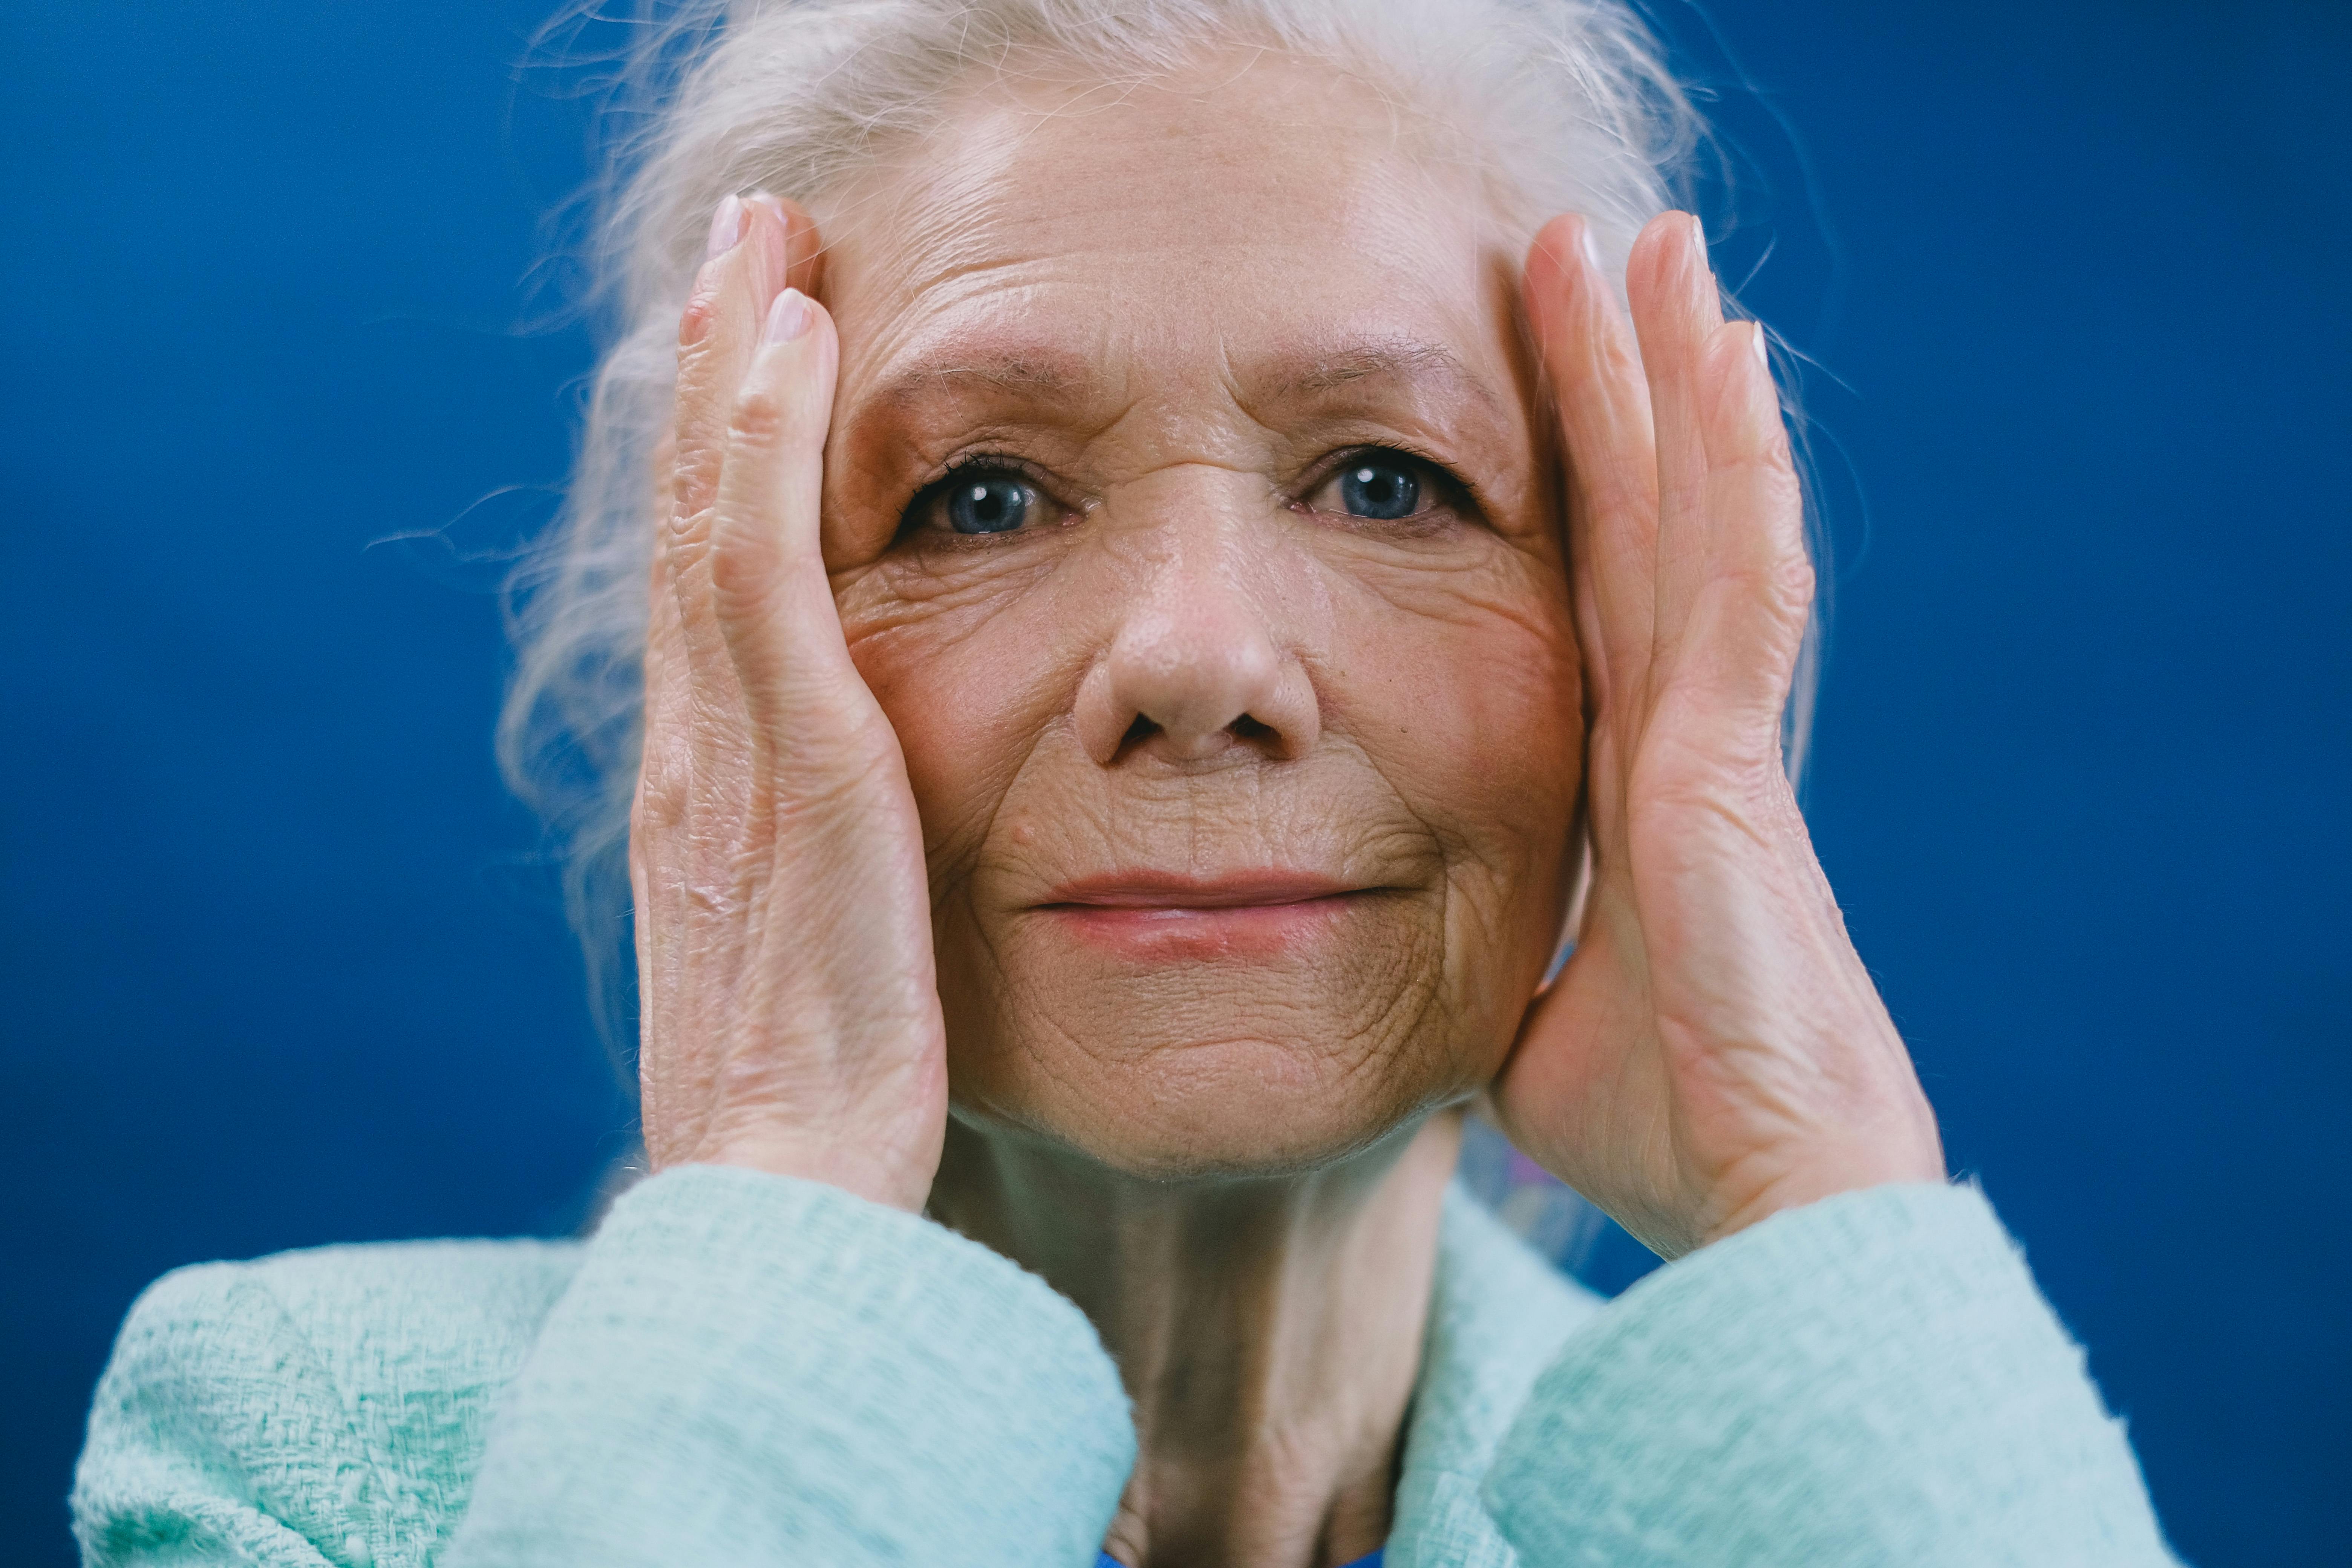 An elderly lady touching her temples | Source: Pexels